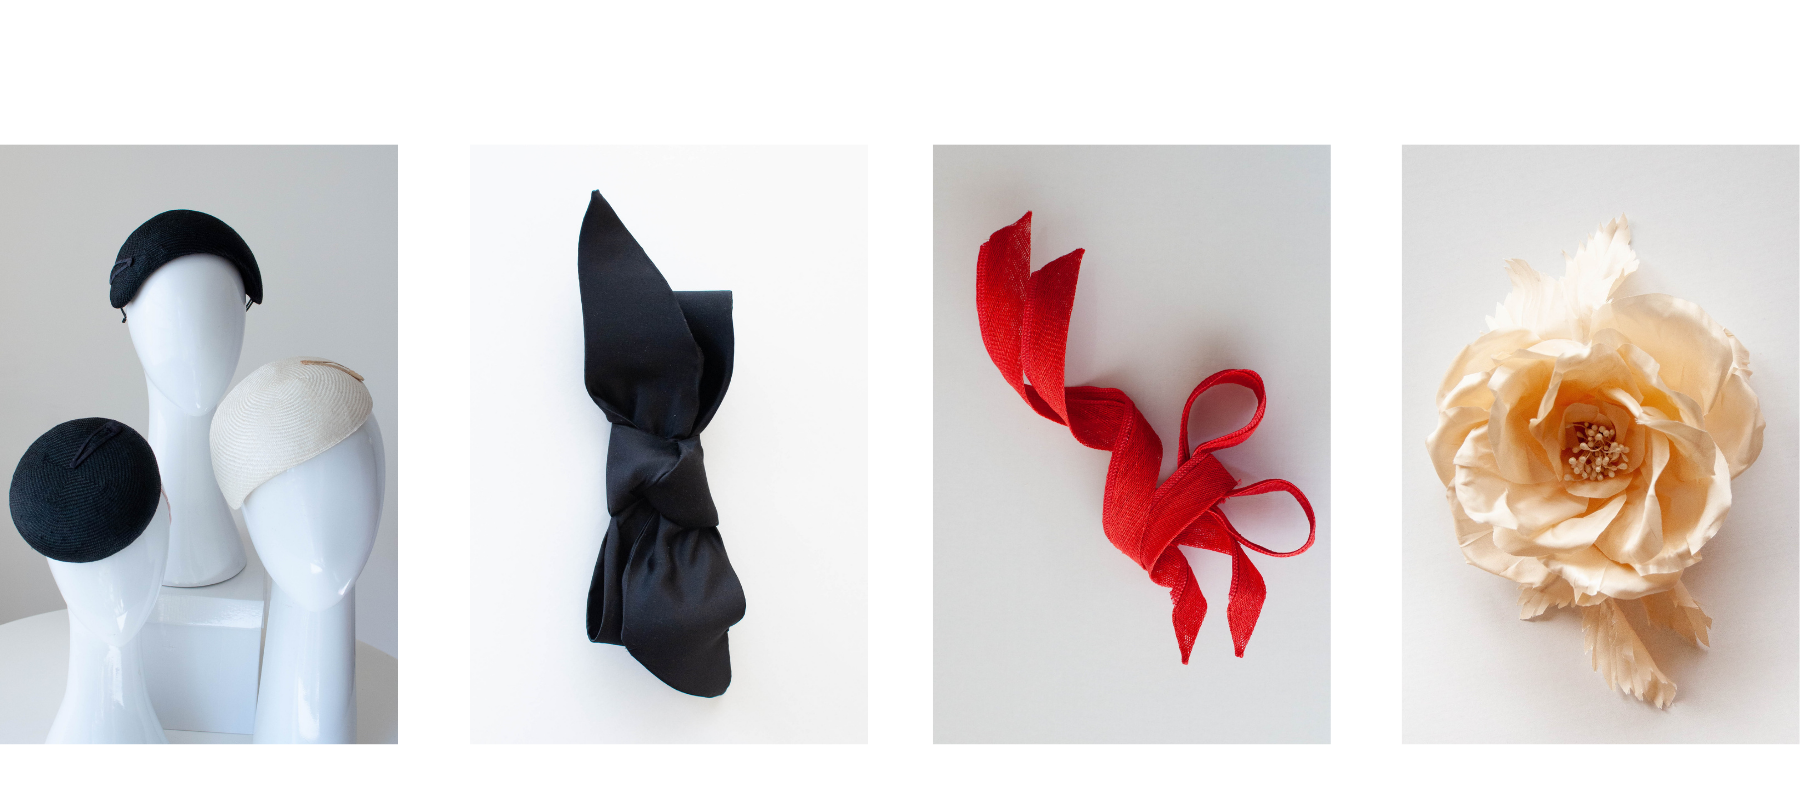 interchangeable millinery mix and match by Felicity Northeast Millinery